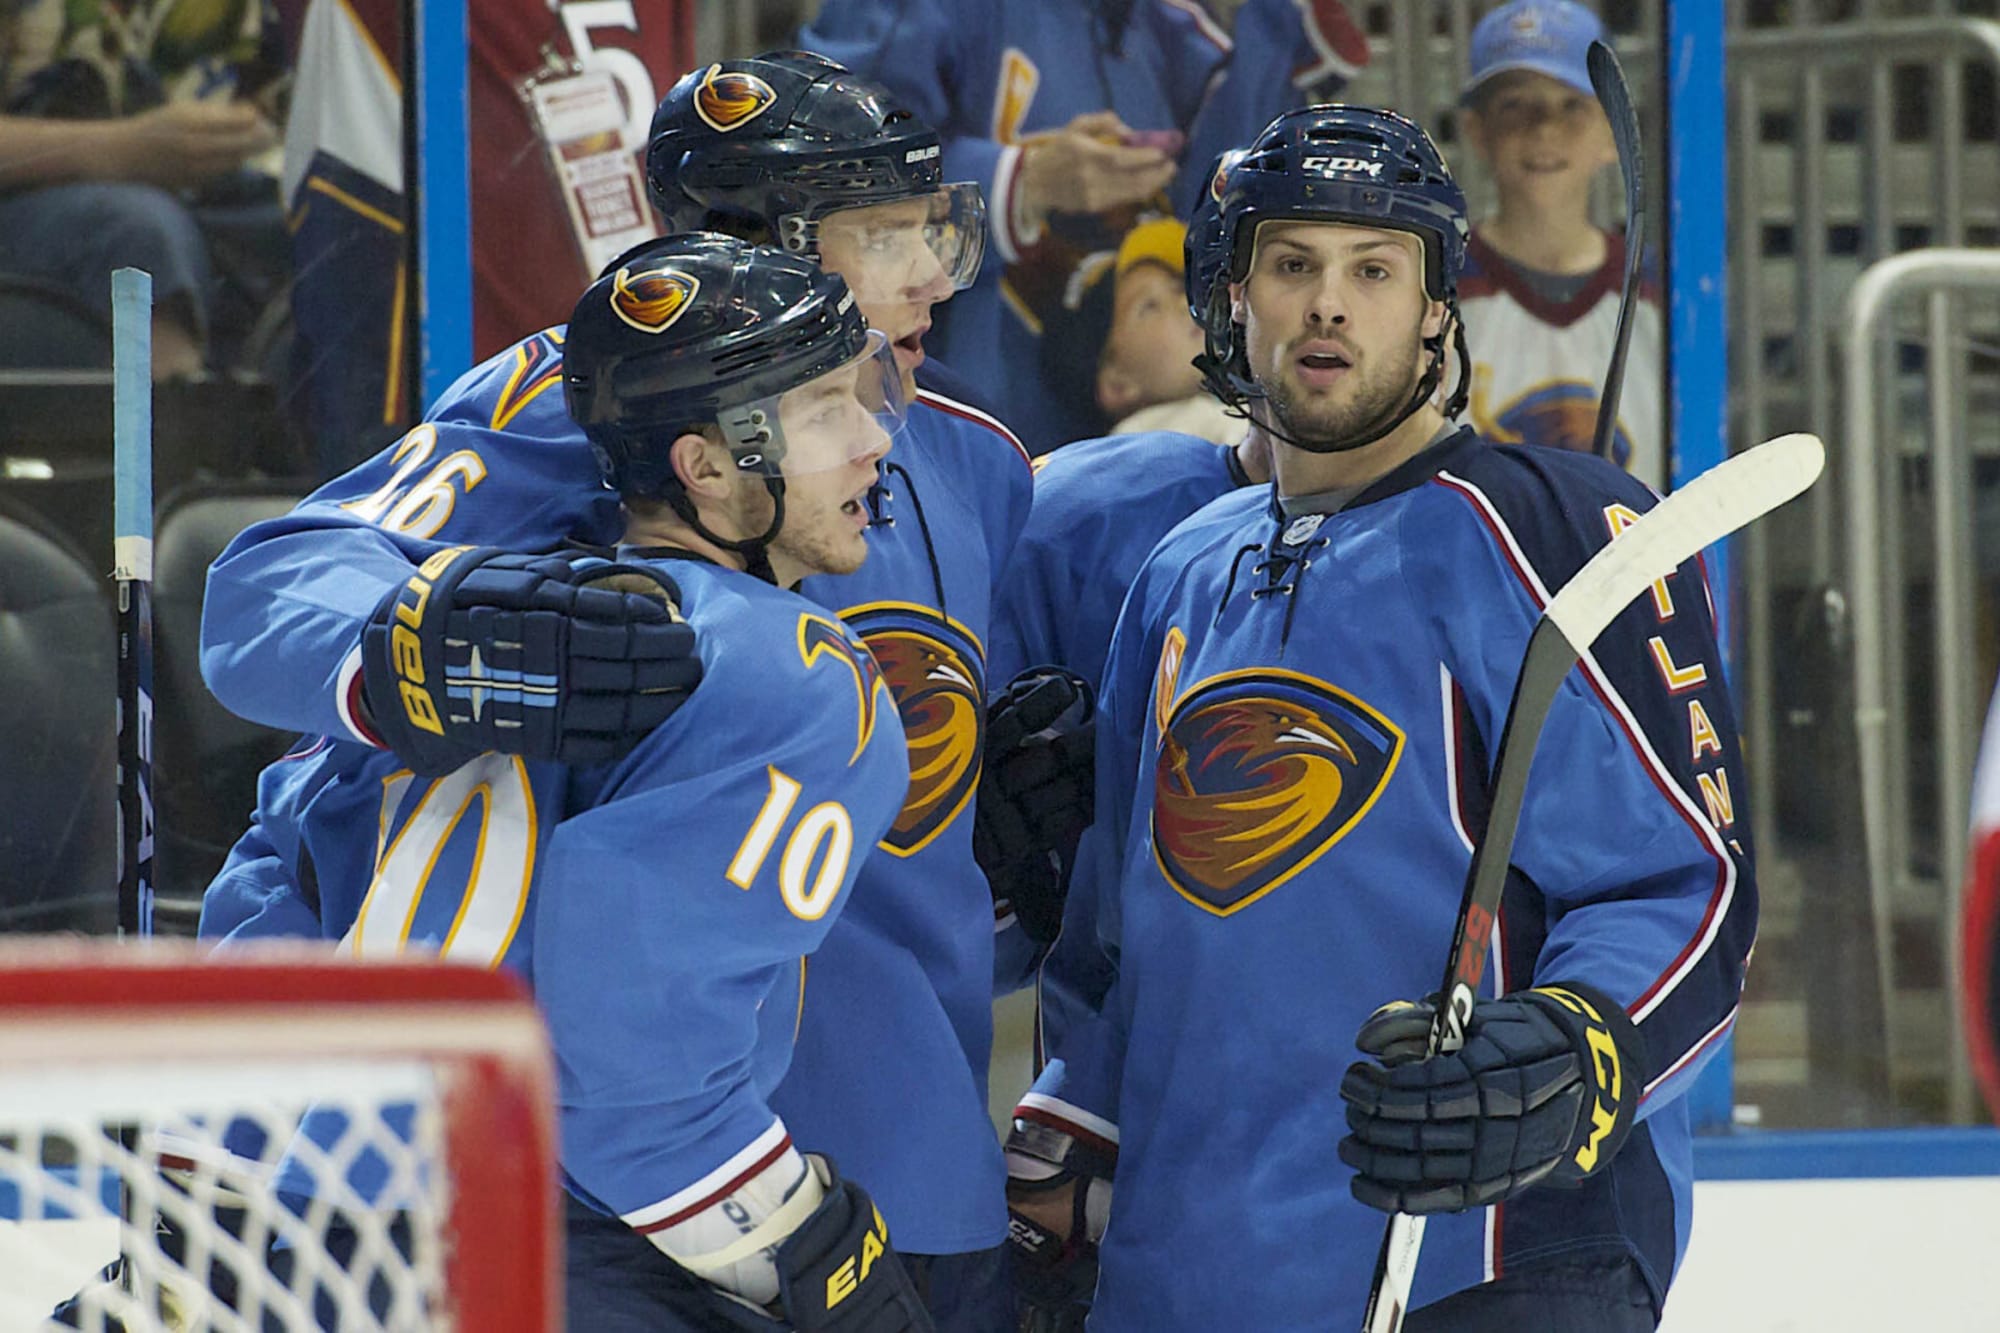 Expansion: The Atlanta Thrashers were relocated to Winnipeg and rebranded as the Jets in 2011 (Image: NHL)